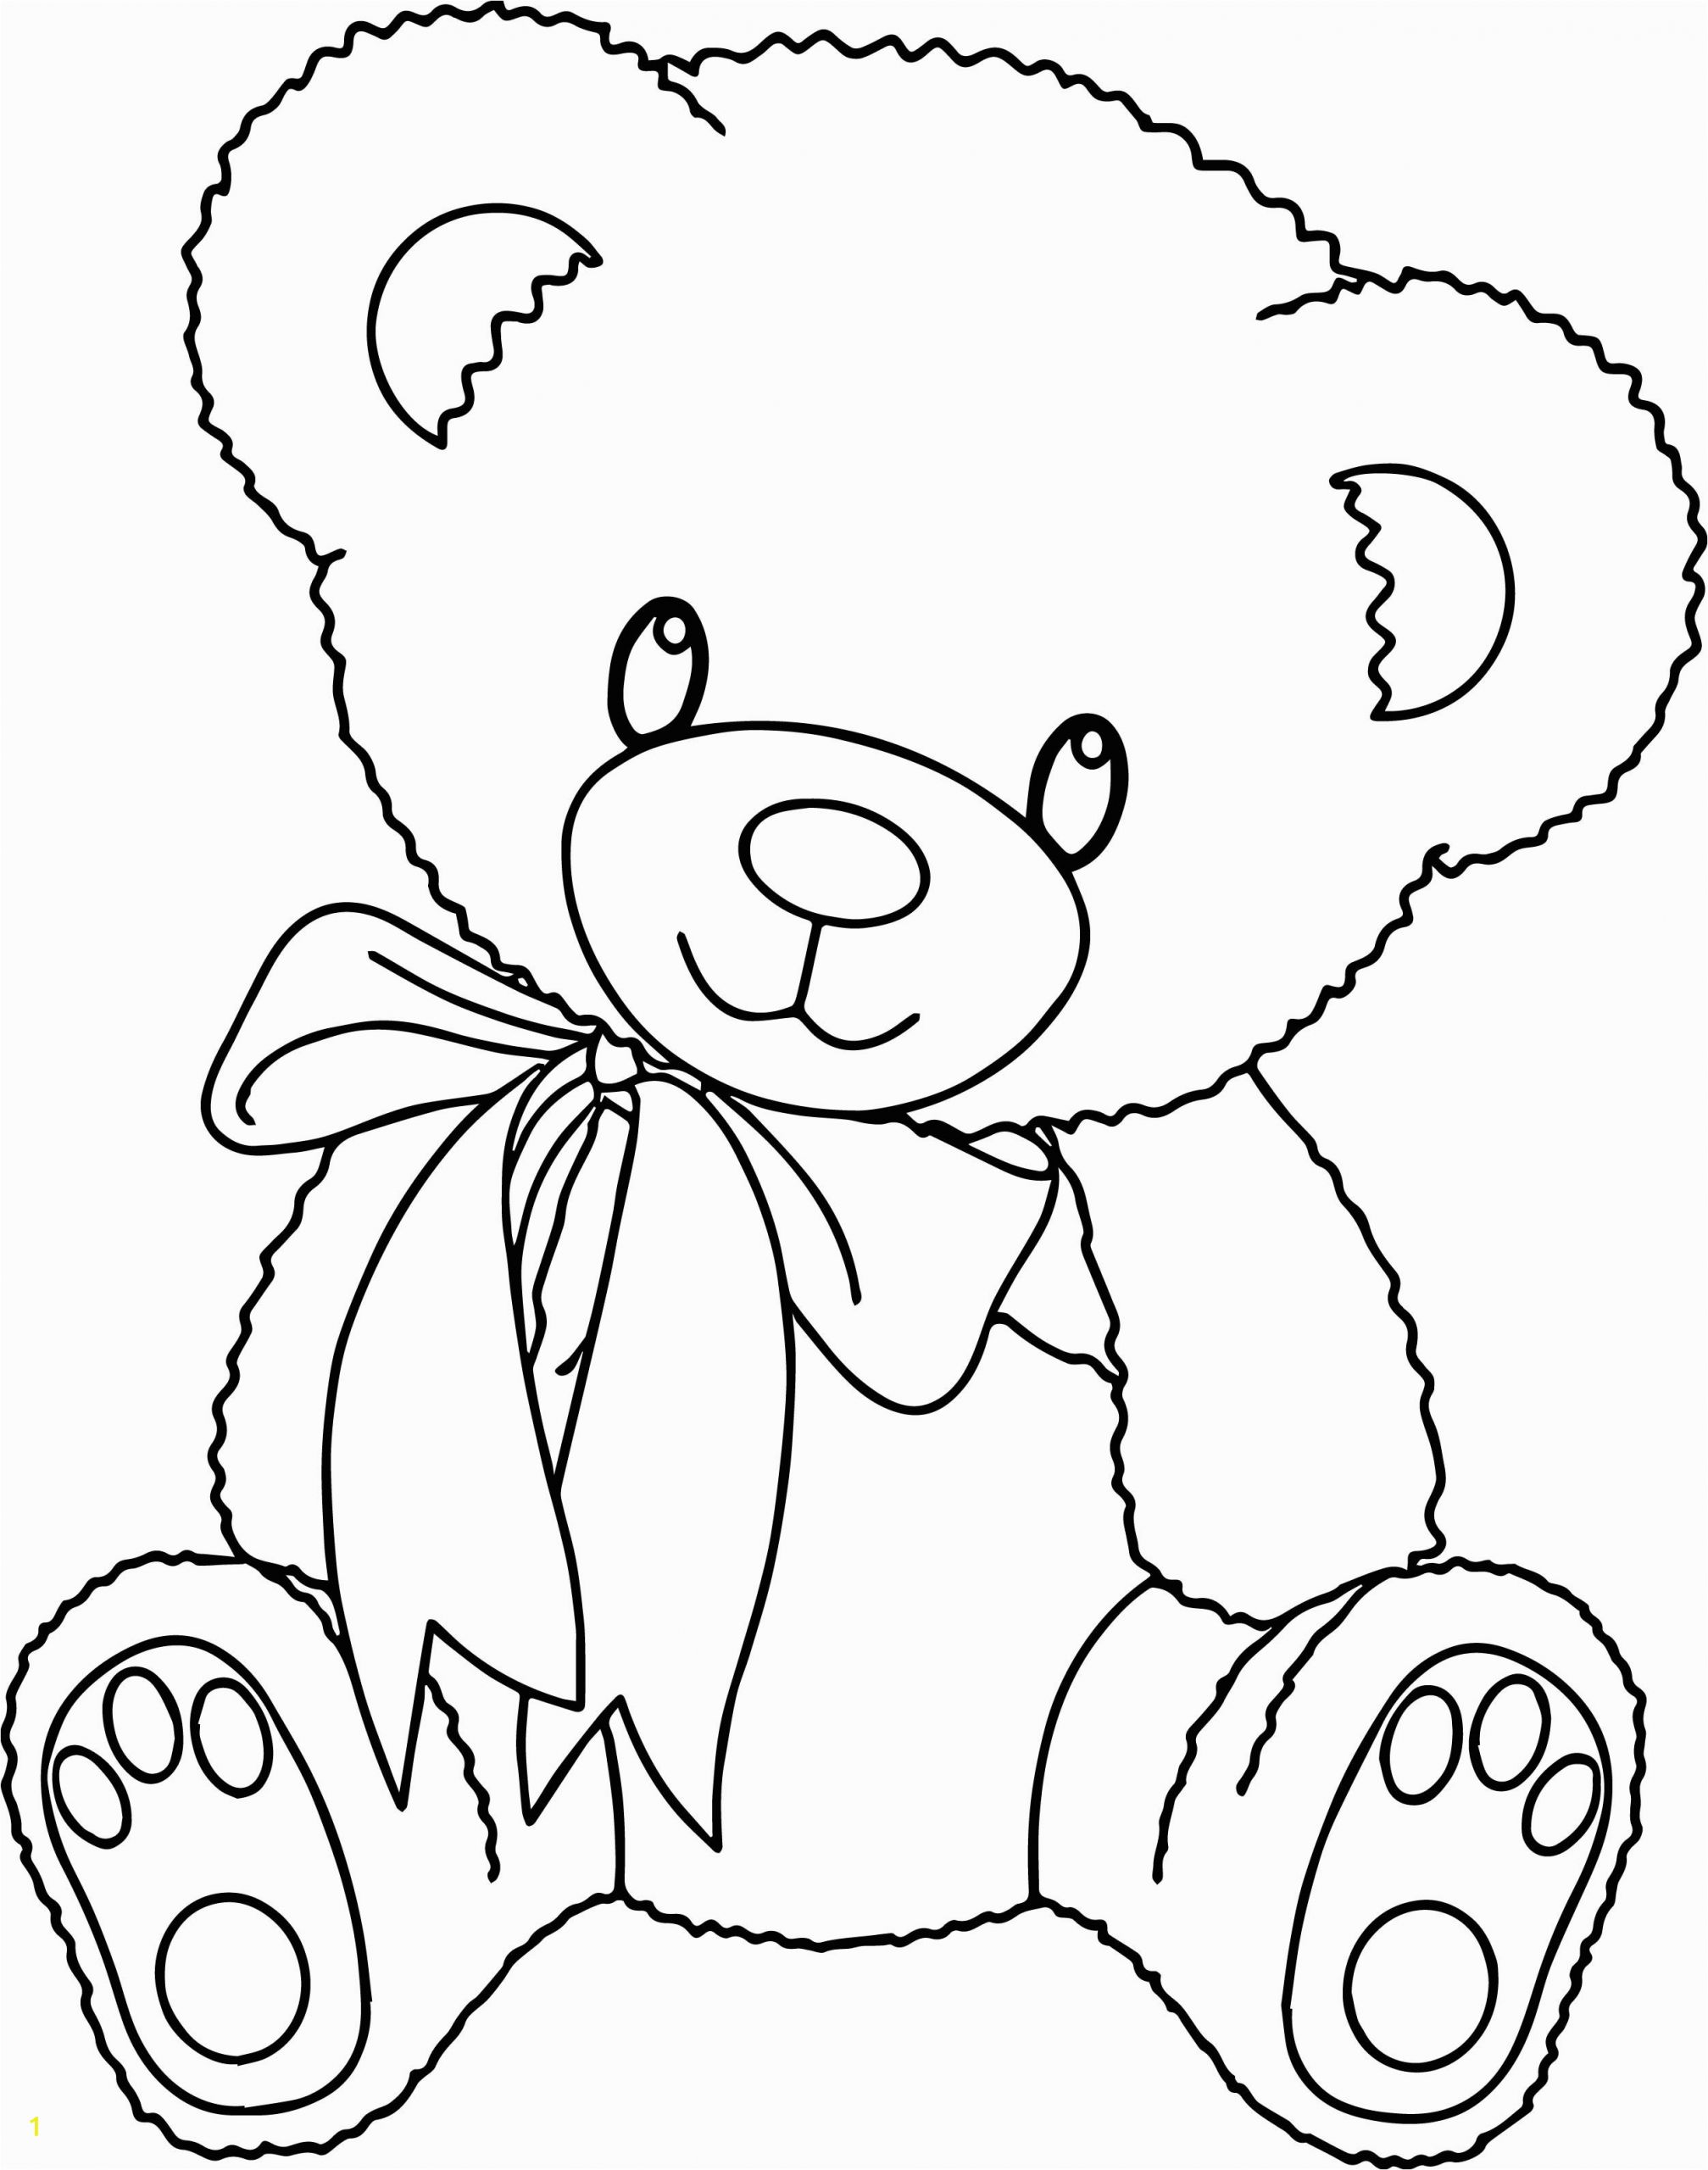 teddy bear holding a heart coloring pages